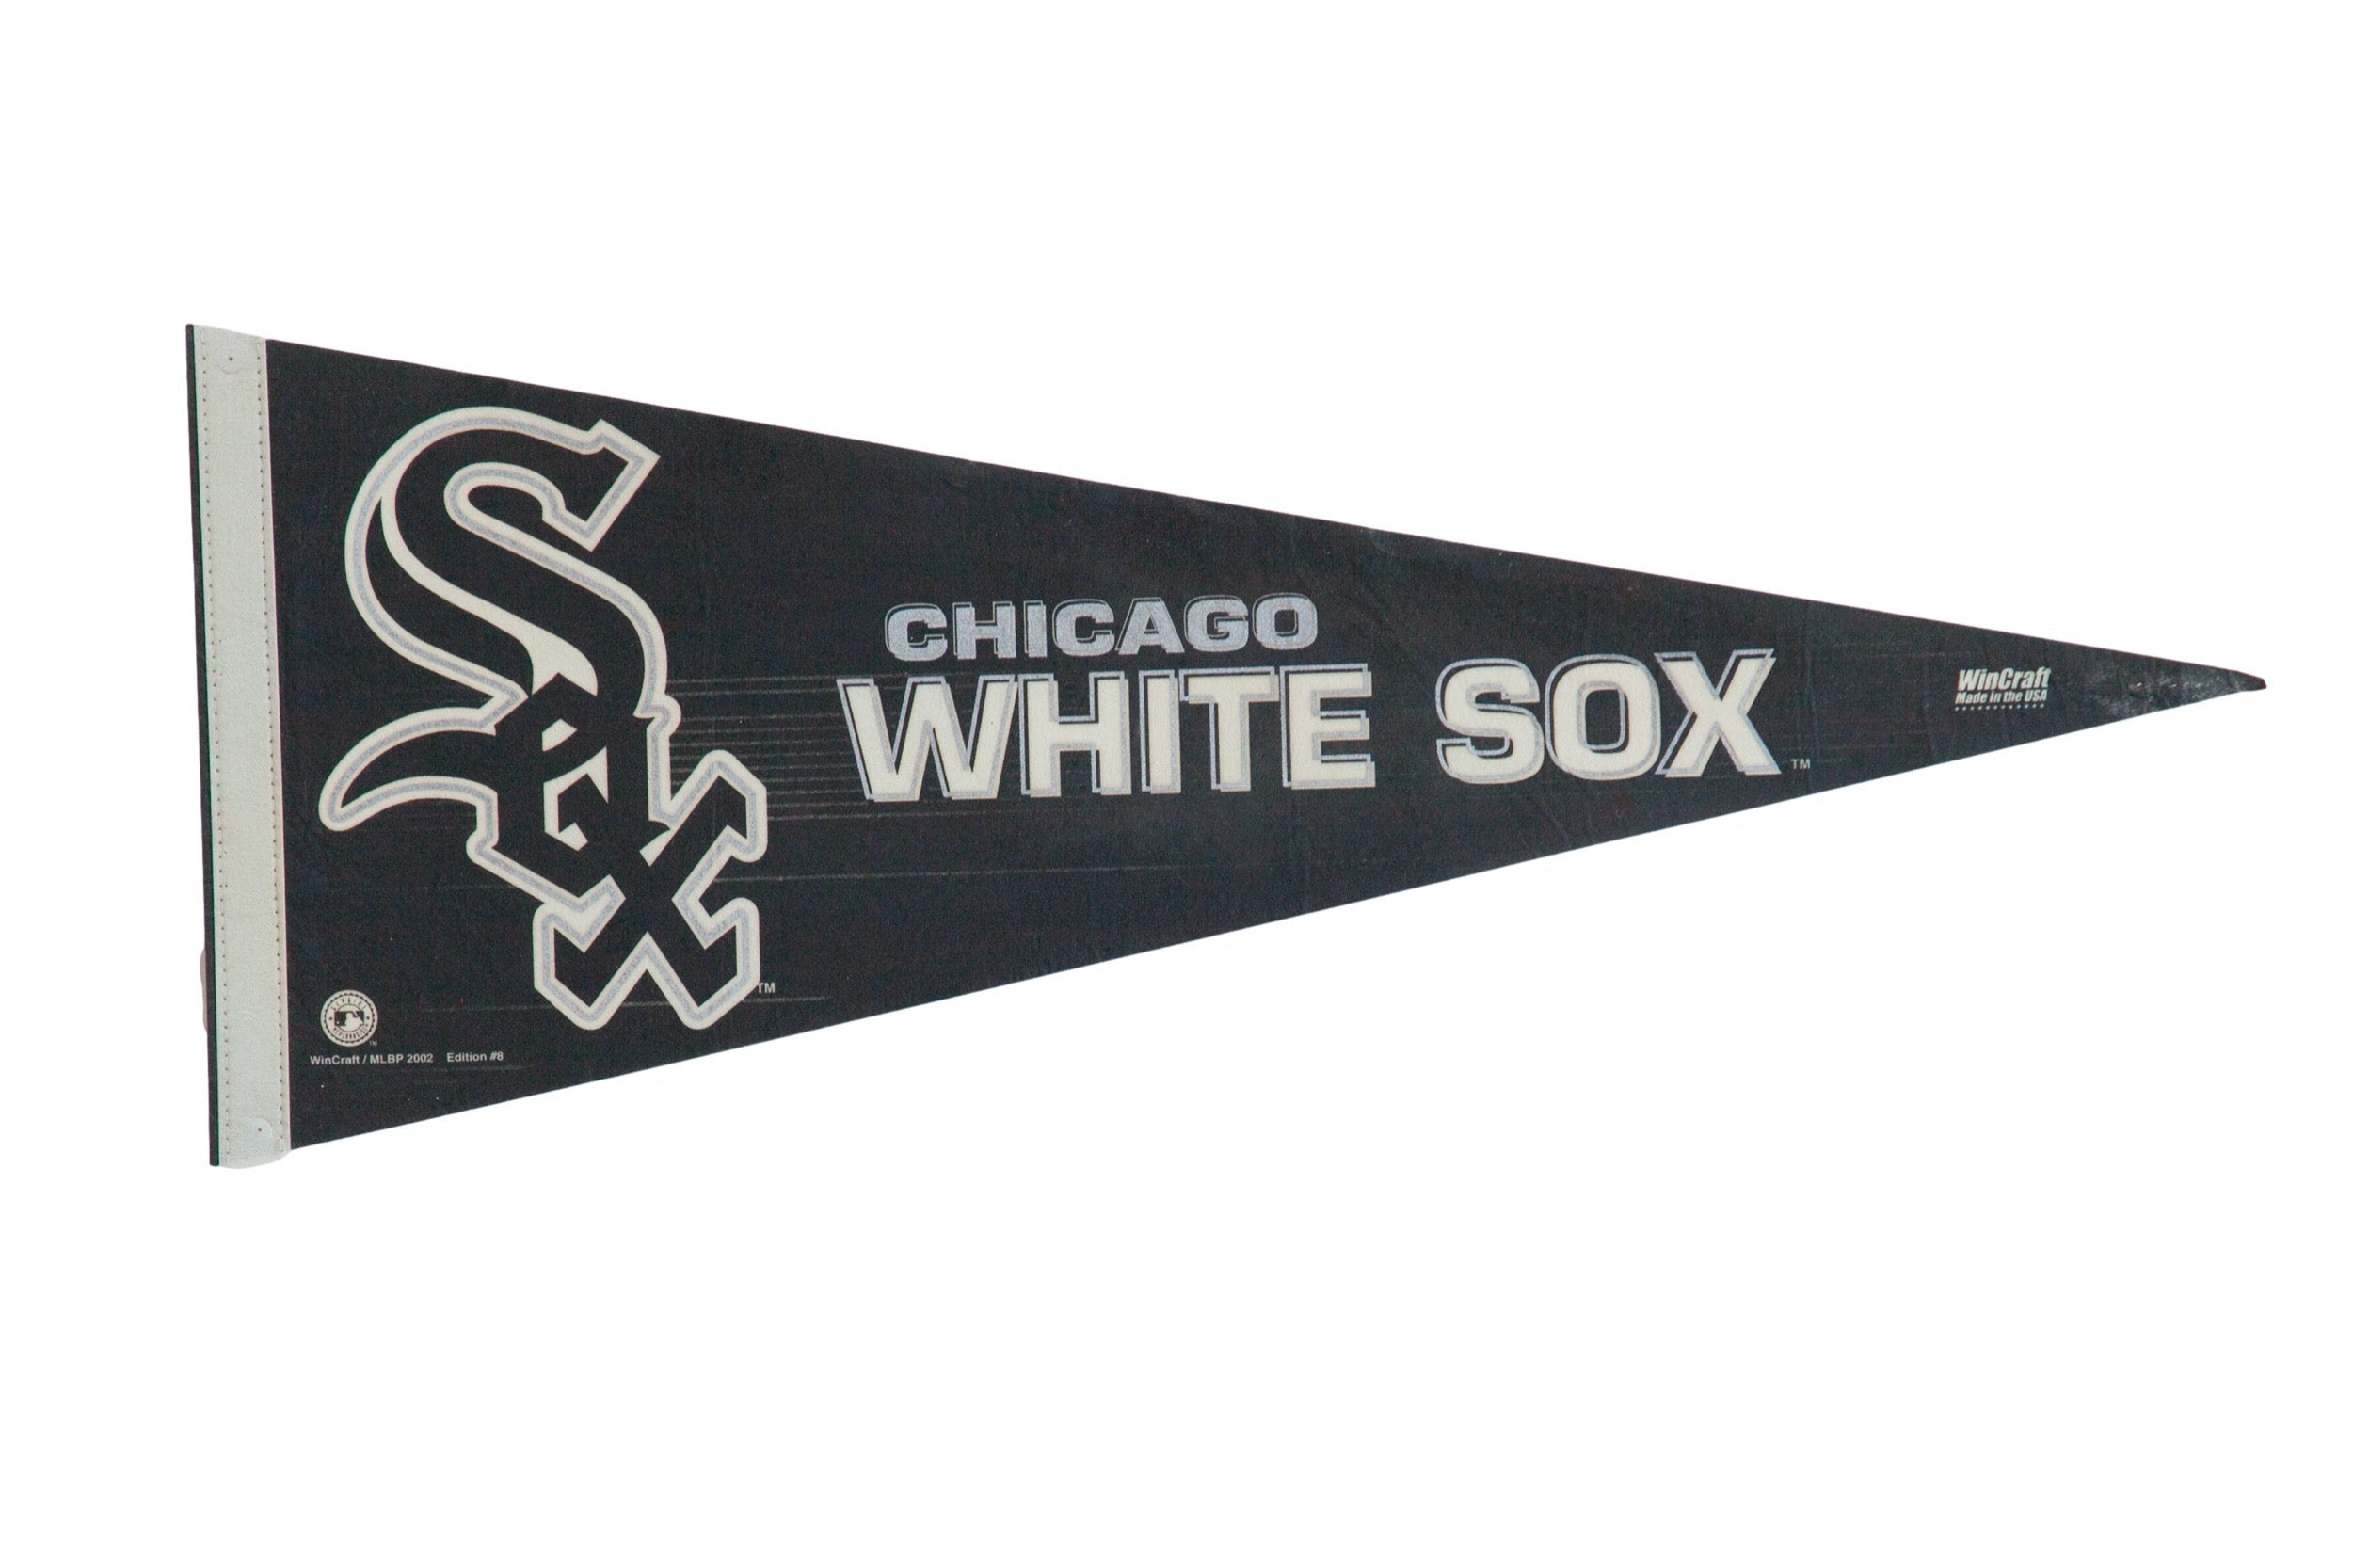 Retro Chicago White Sox Full Size Pennant Fast Shipping